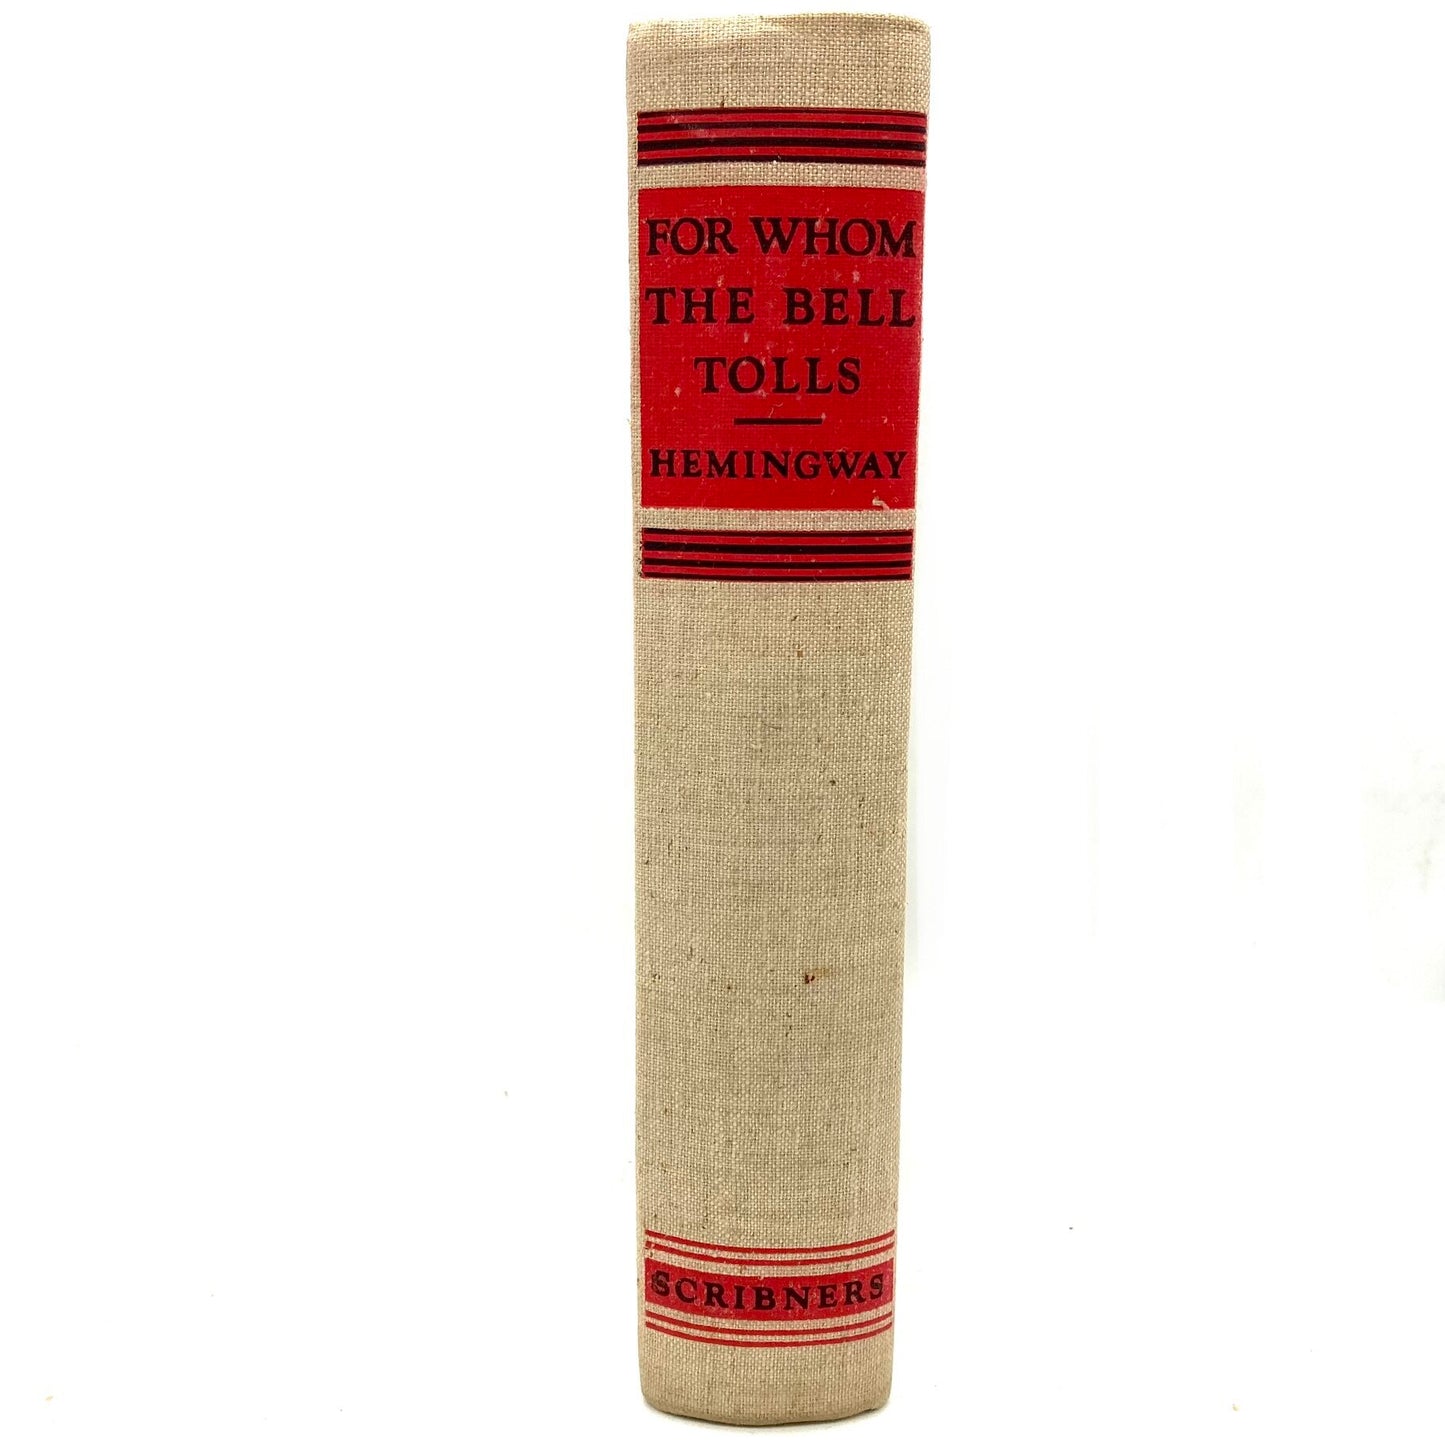 HEMINGWAY, Ernest "For Whom the Bell Tolls" [Scribners, 1940] Early Printing - Buzz Bookstore